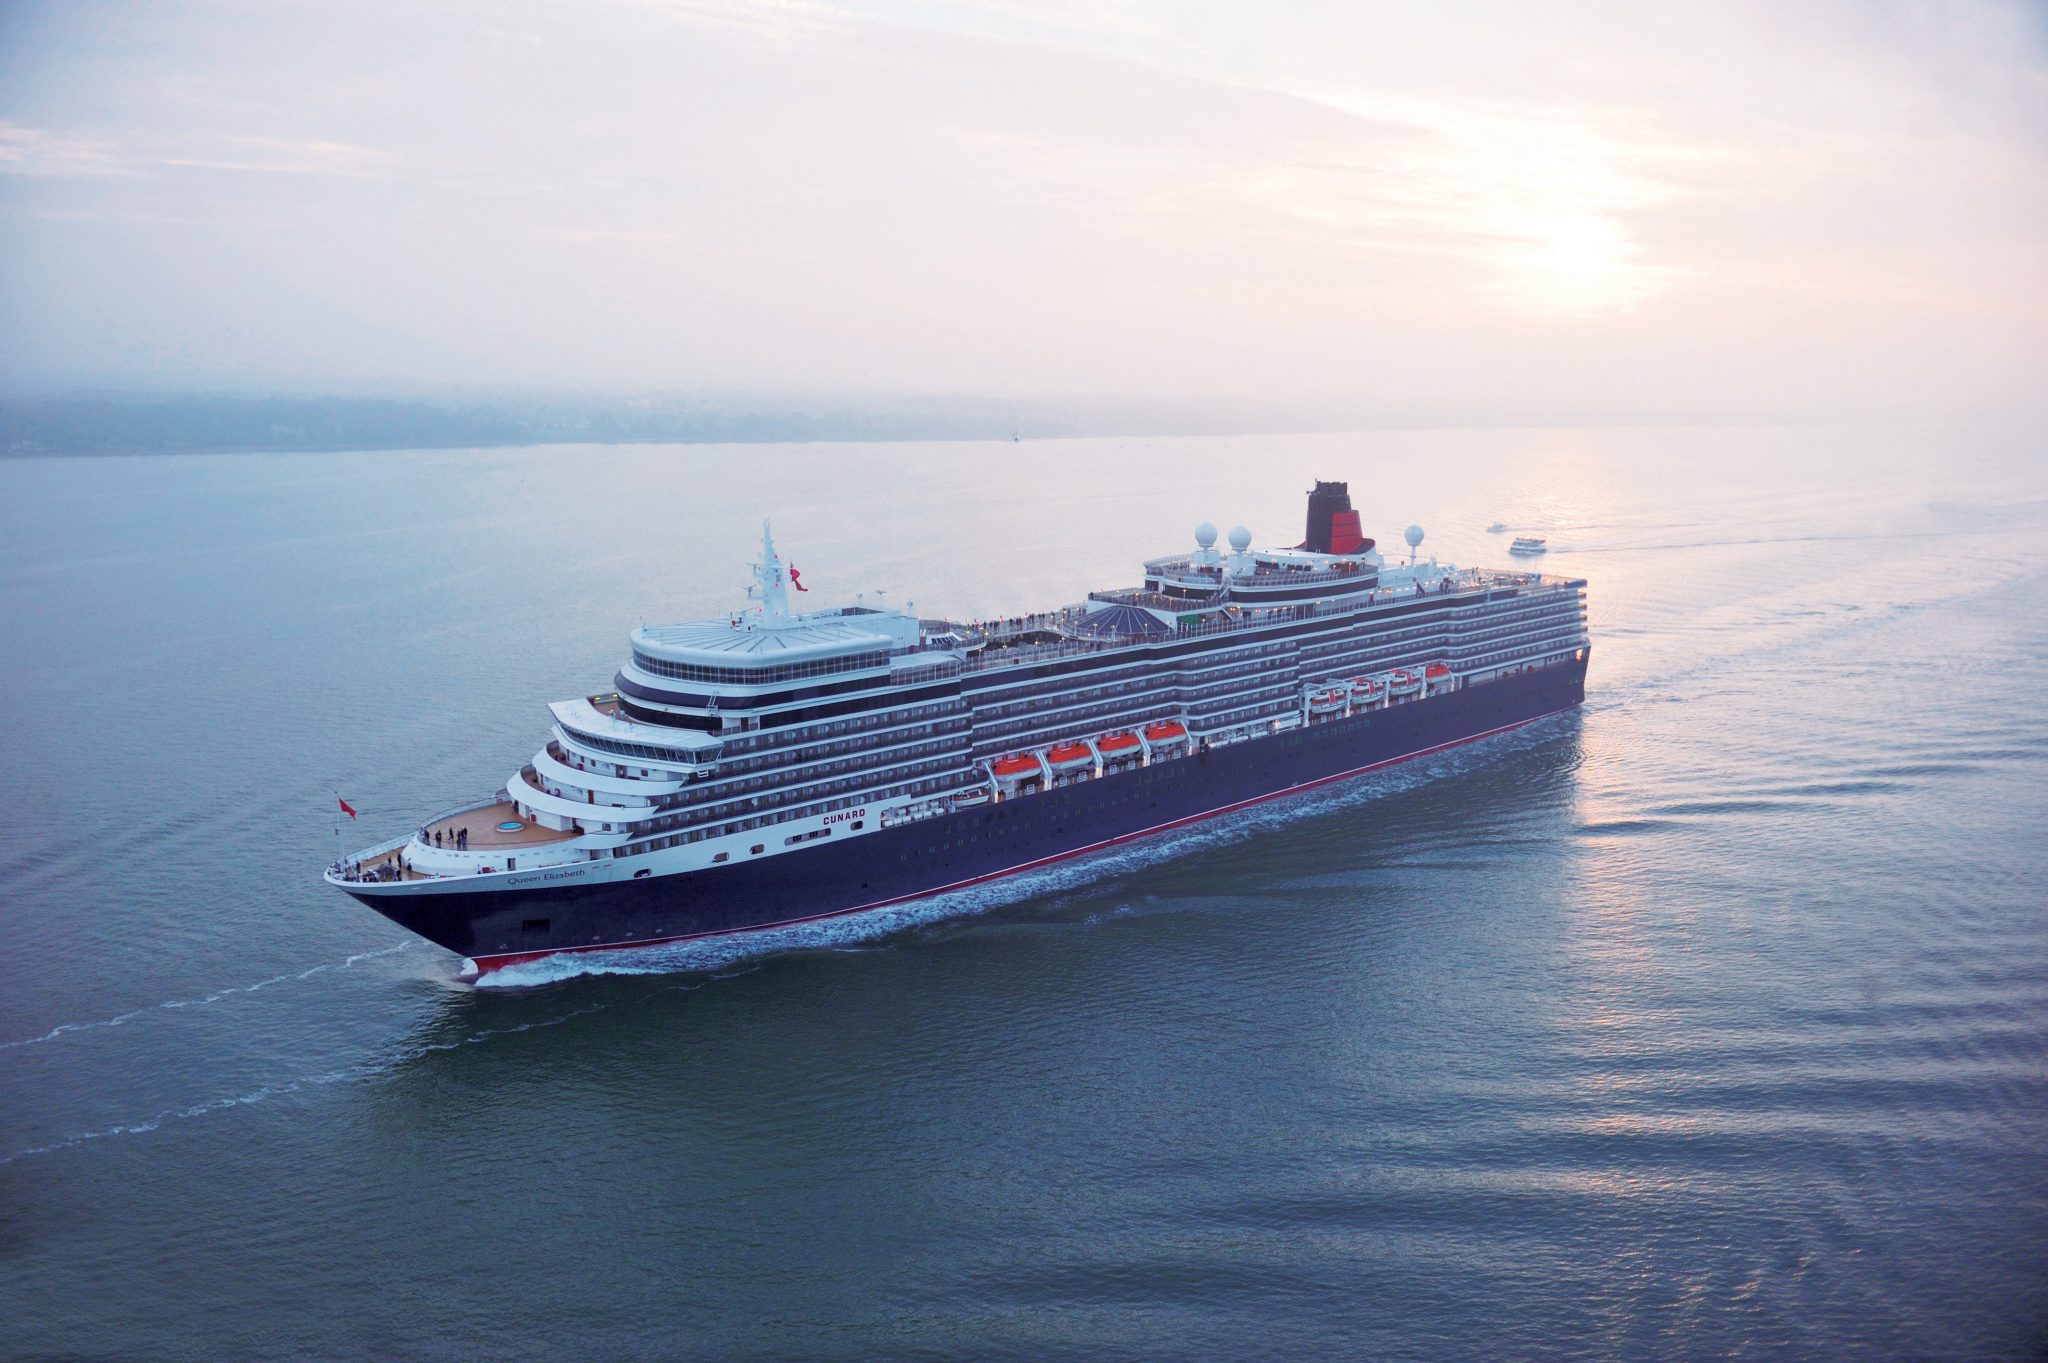 Cruise on Queen Elizabeth from Melbourne to New Zealand with free